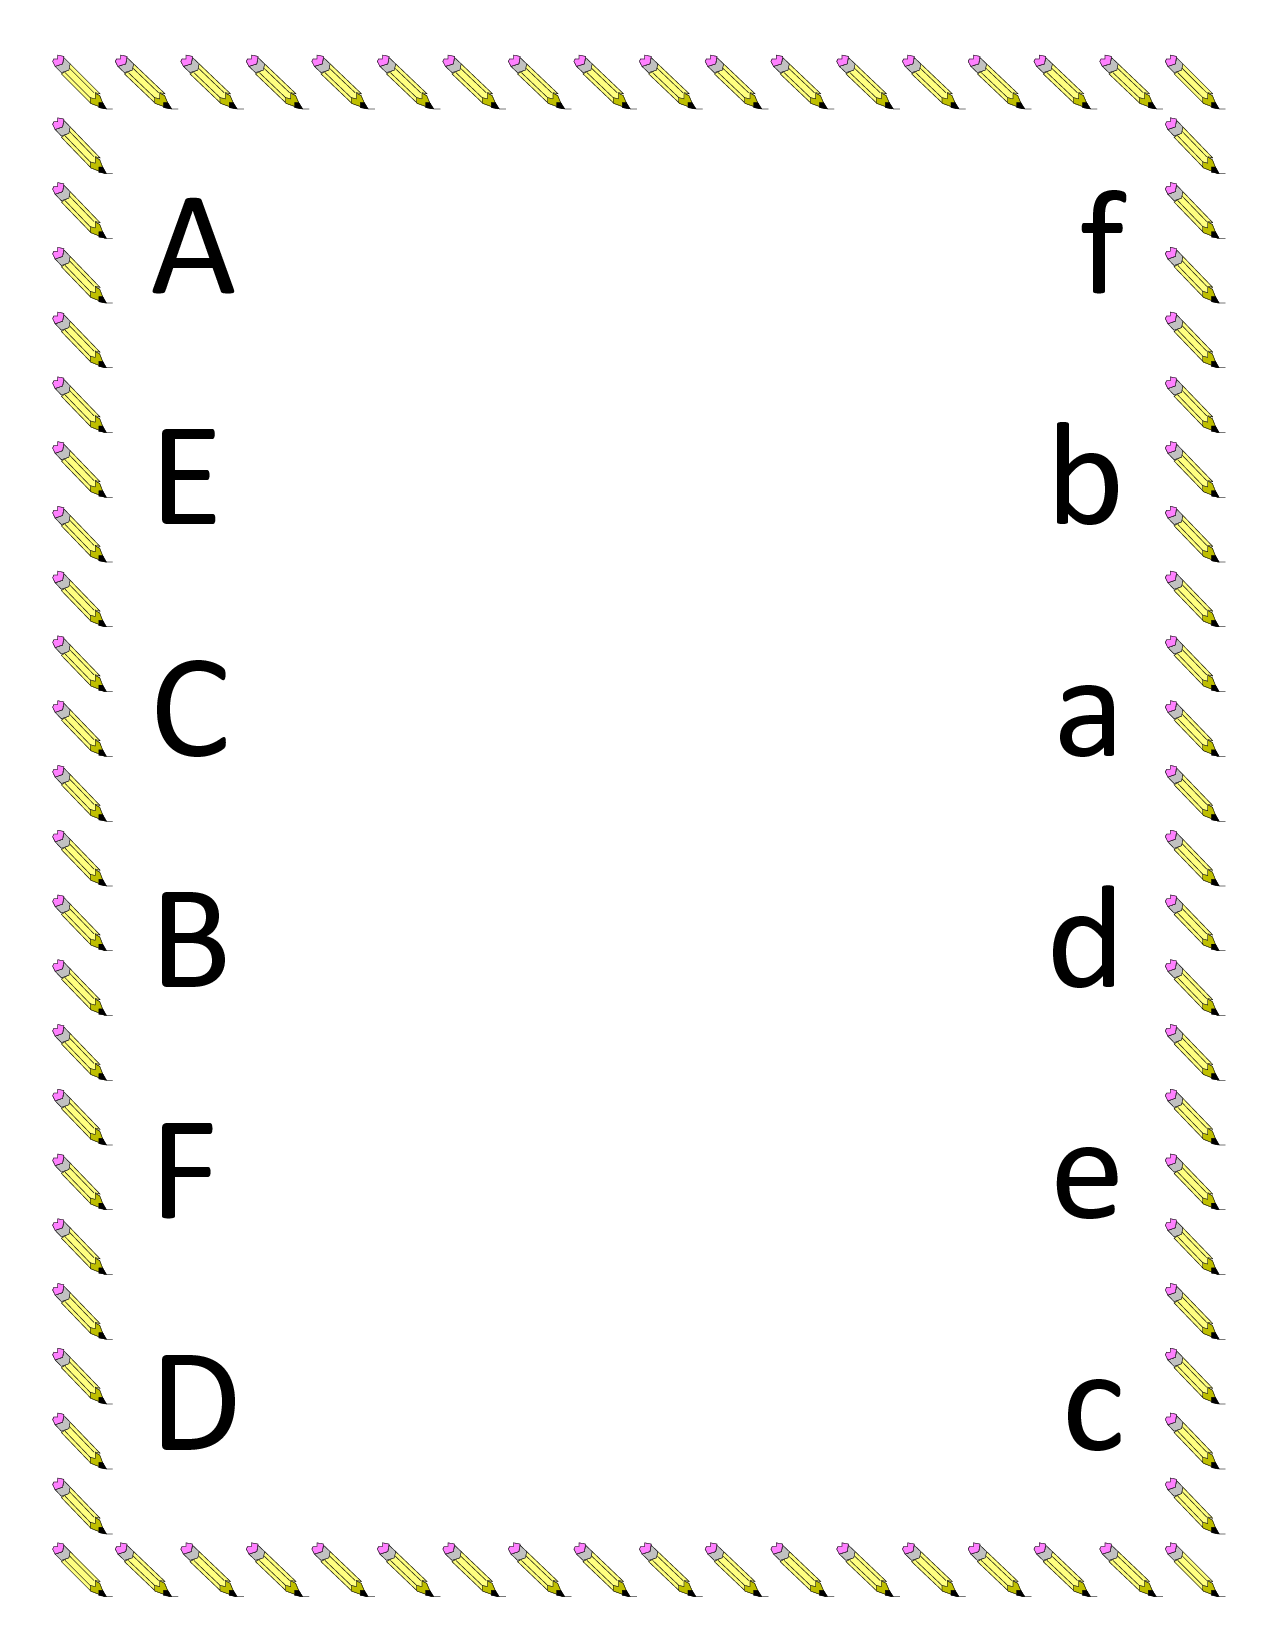 Letter Printable Images Gallery Category Page 13 - printablee.com